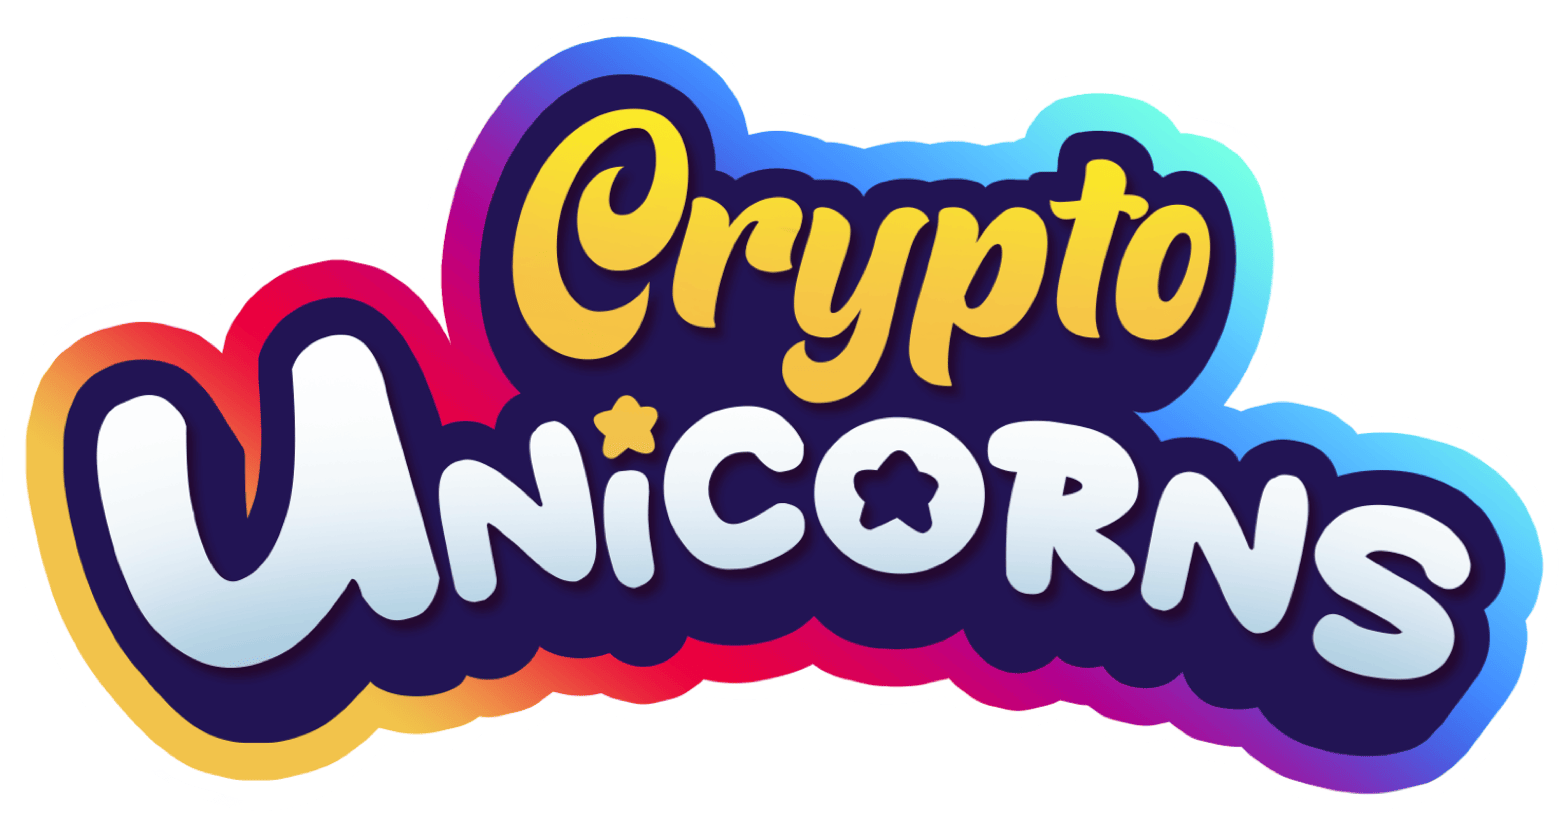 Crypto Unicorns Players to Gain More Governance Power by Staking their NFT Badges